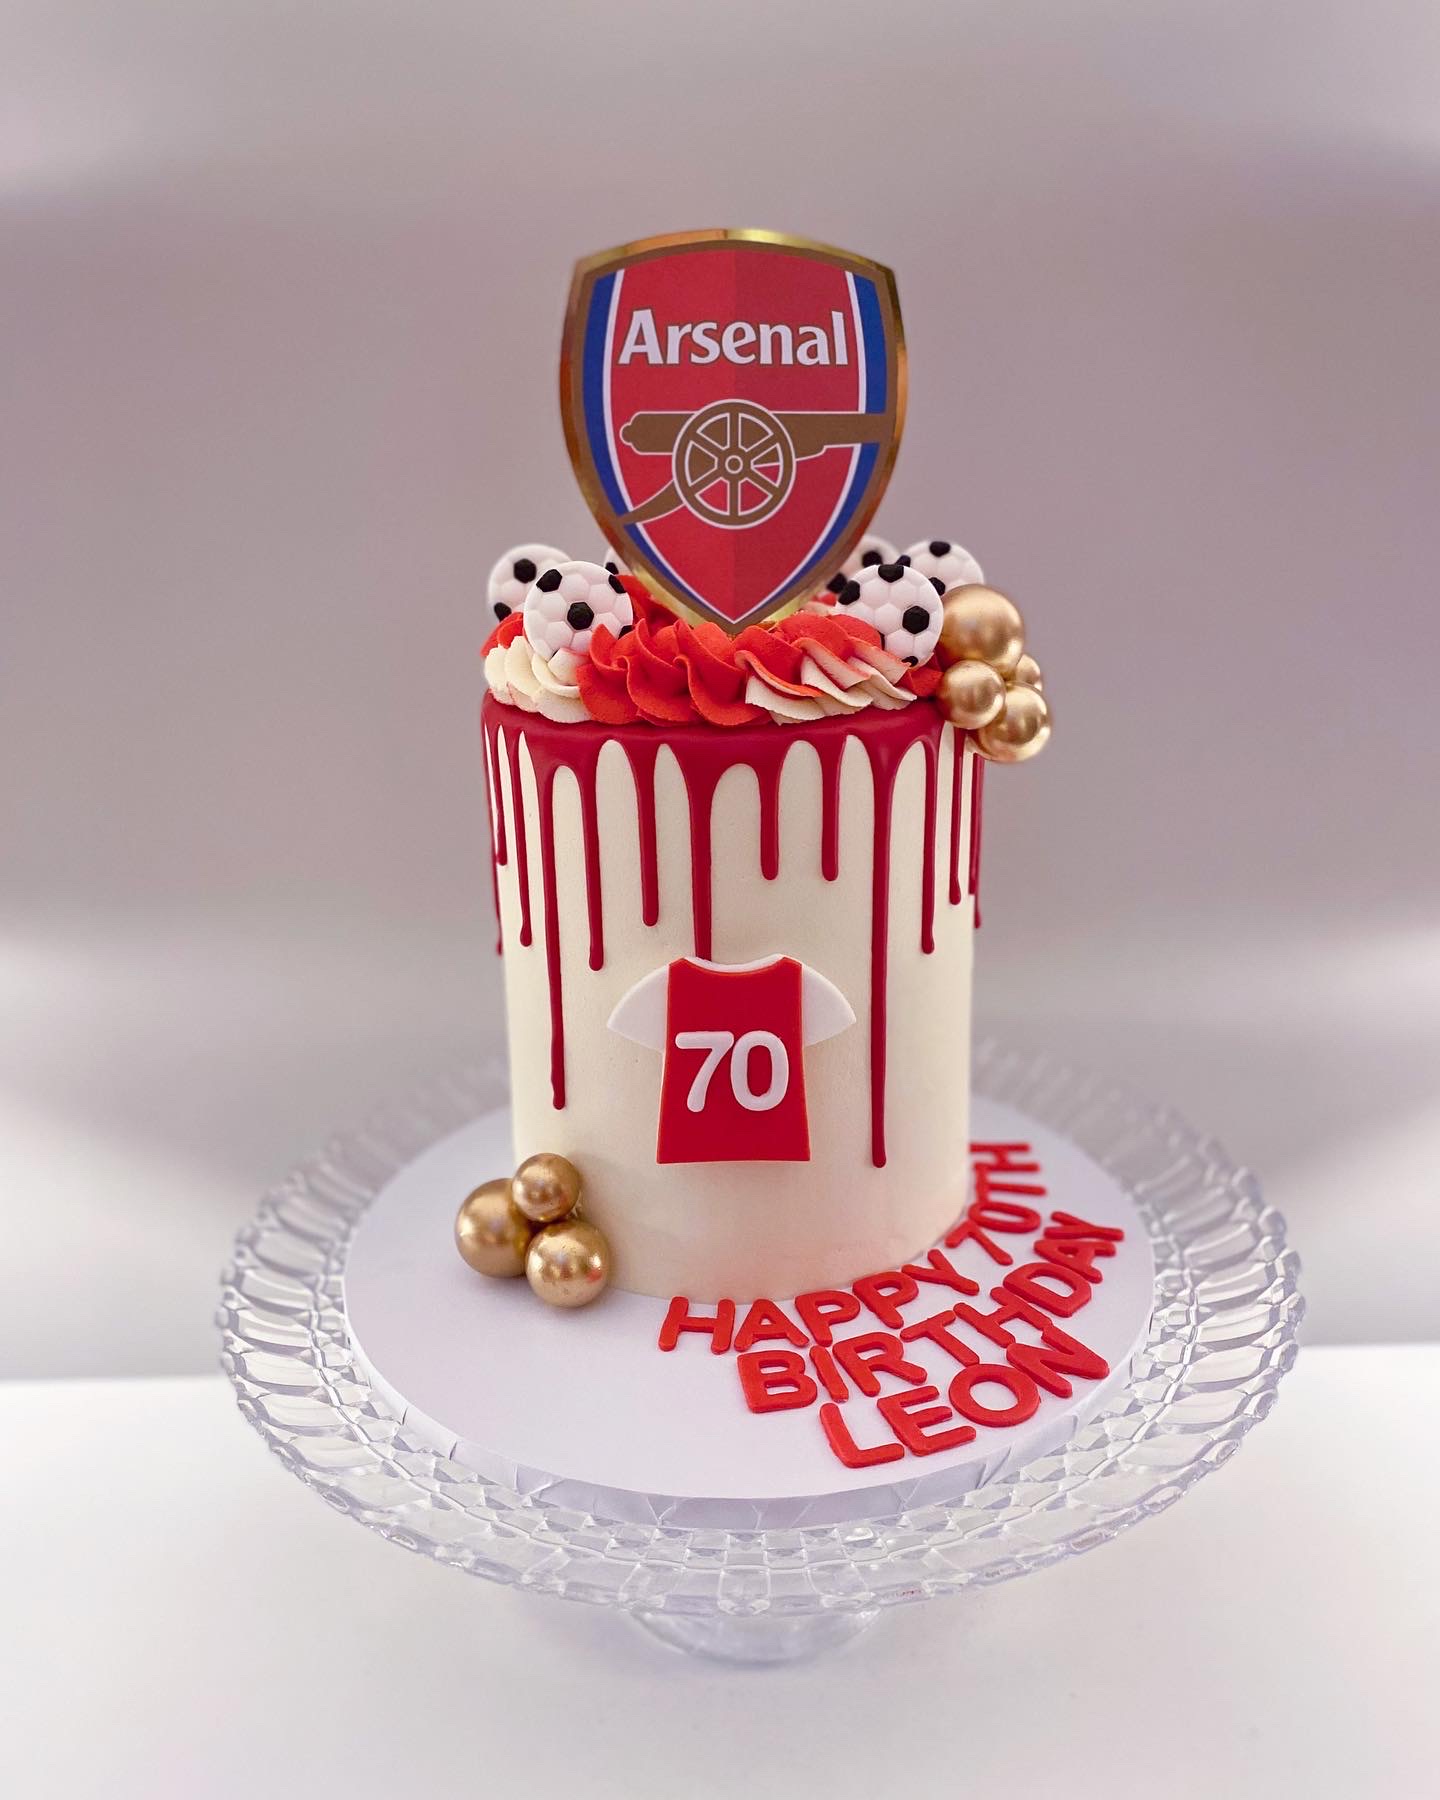 Arsenal and Real Madrid fan cake! #birth